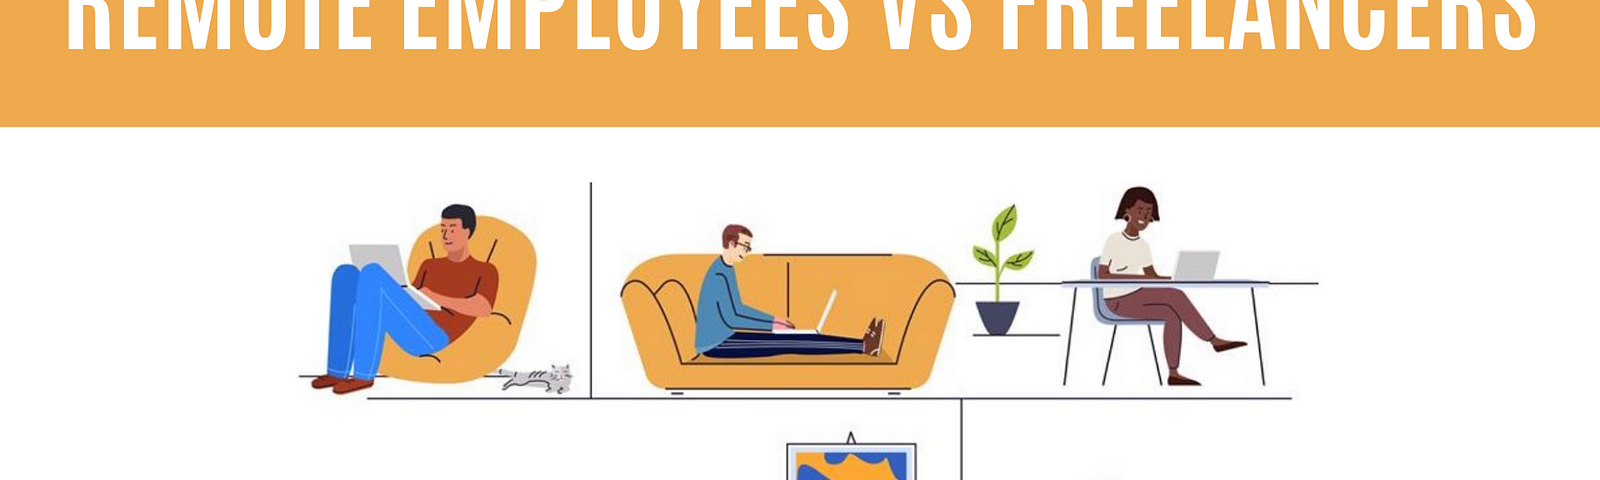 Remote Employees vs Freelancers: Which One Best Suits Your Company?